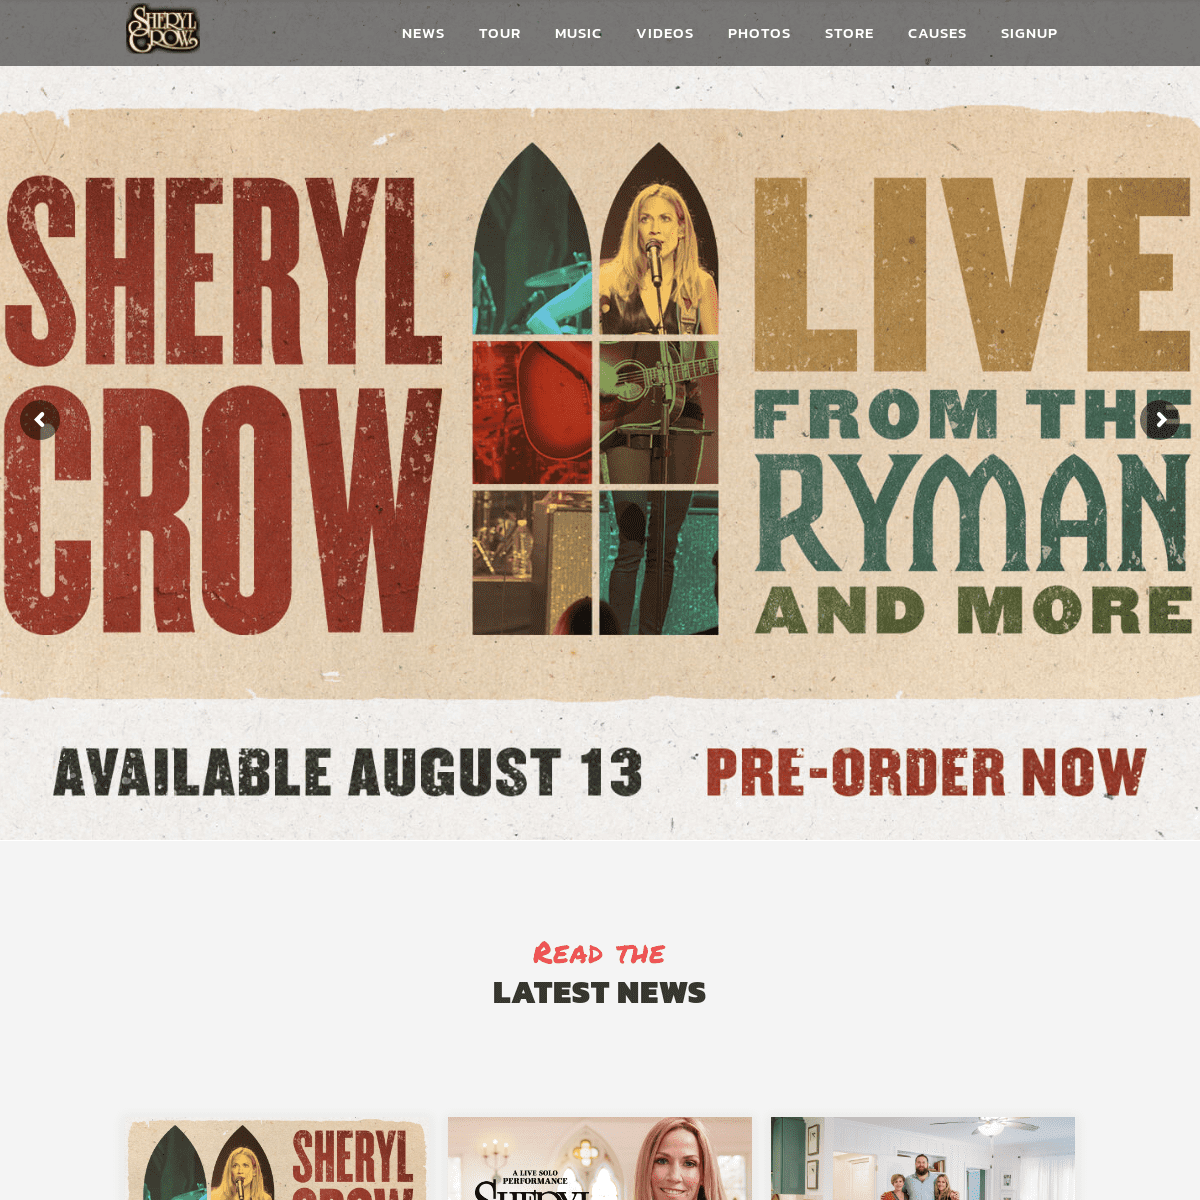 A complete backup of https://sherylcrow.com